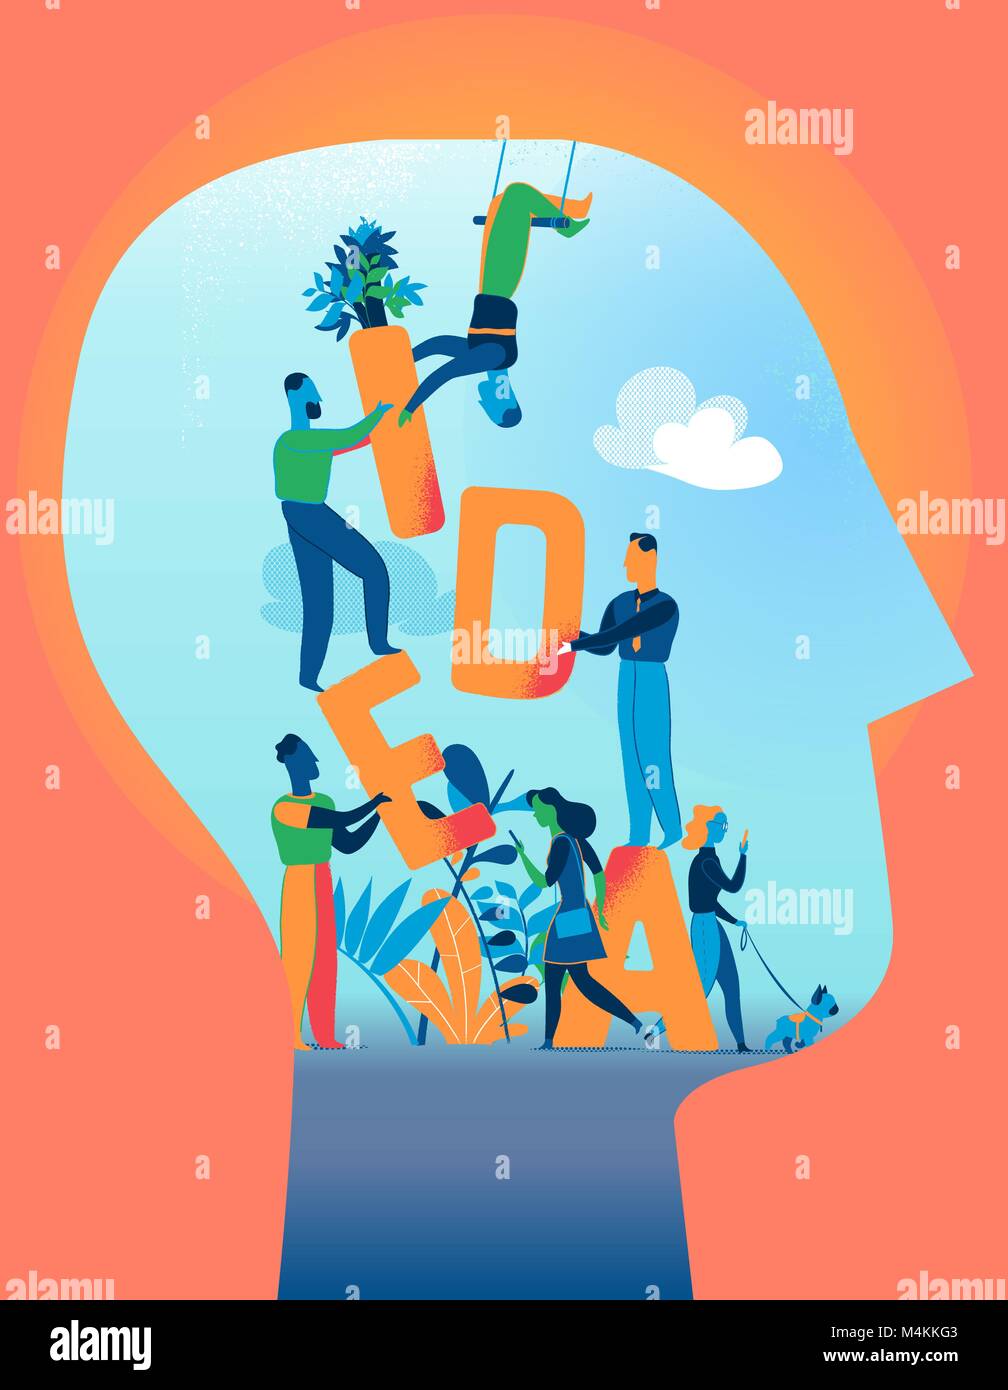 Work together to build a great idea Stock Vector